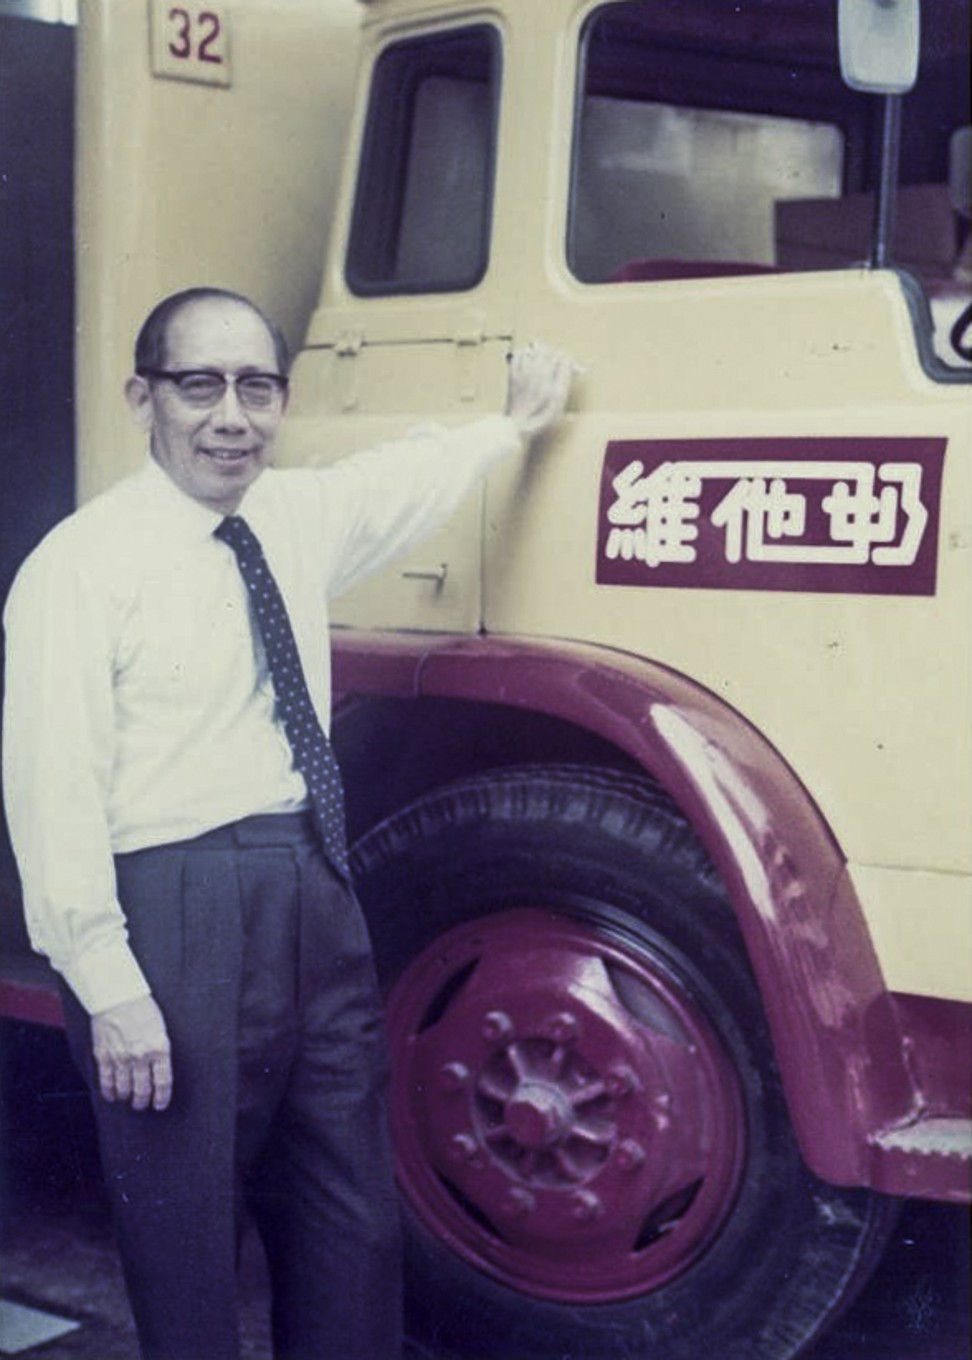 Lo Kwee-seong of Vitasoy stands next to a Vitasoy truck in this undated photograph.